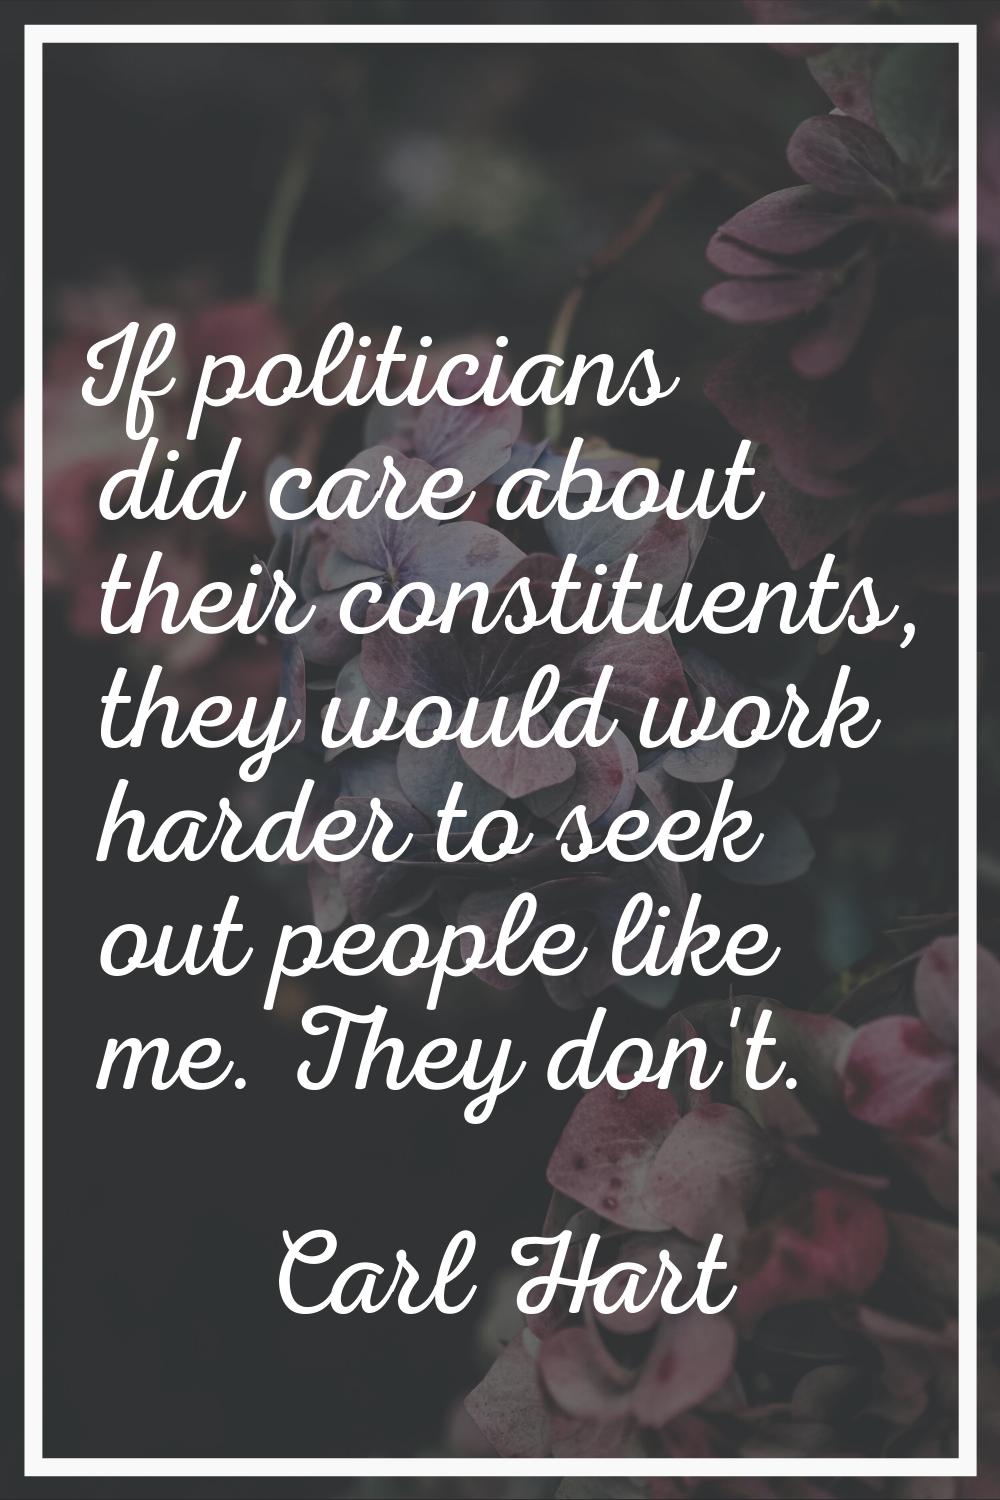 If politicians did care about their constituents, they would work harder to seek out people like me